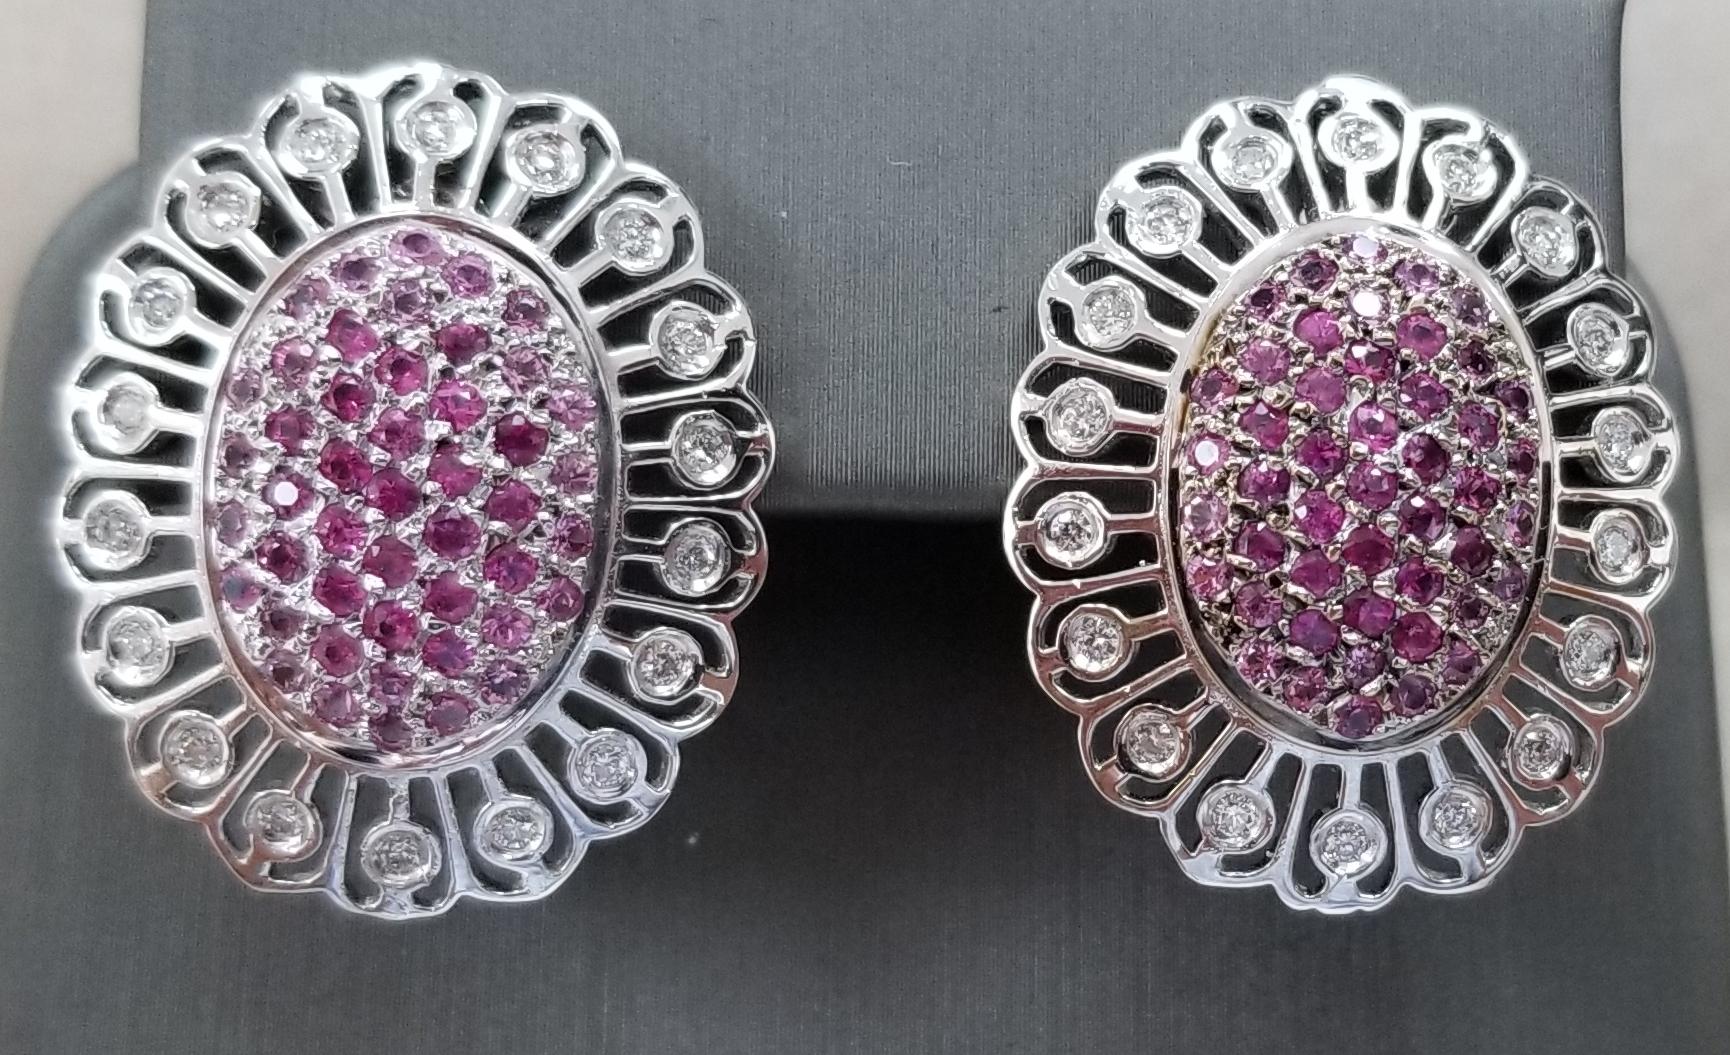 14k white gold multi shade of pink sapphires weighing 2.35cts. paved and then 38 round full cut diamonds of fine quality weighing .50pts. in a lace setting.  French backs for comfort.